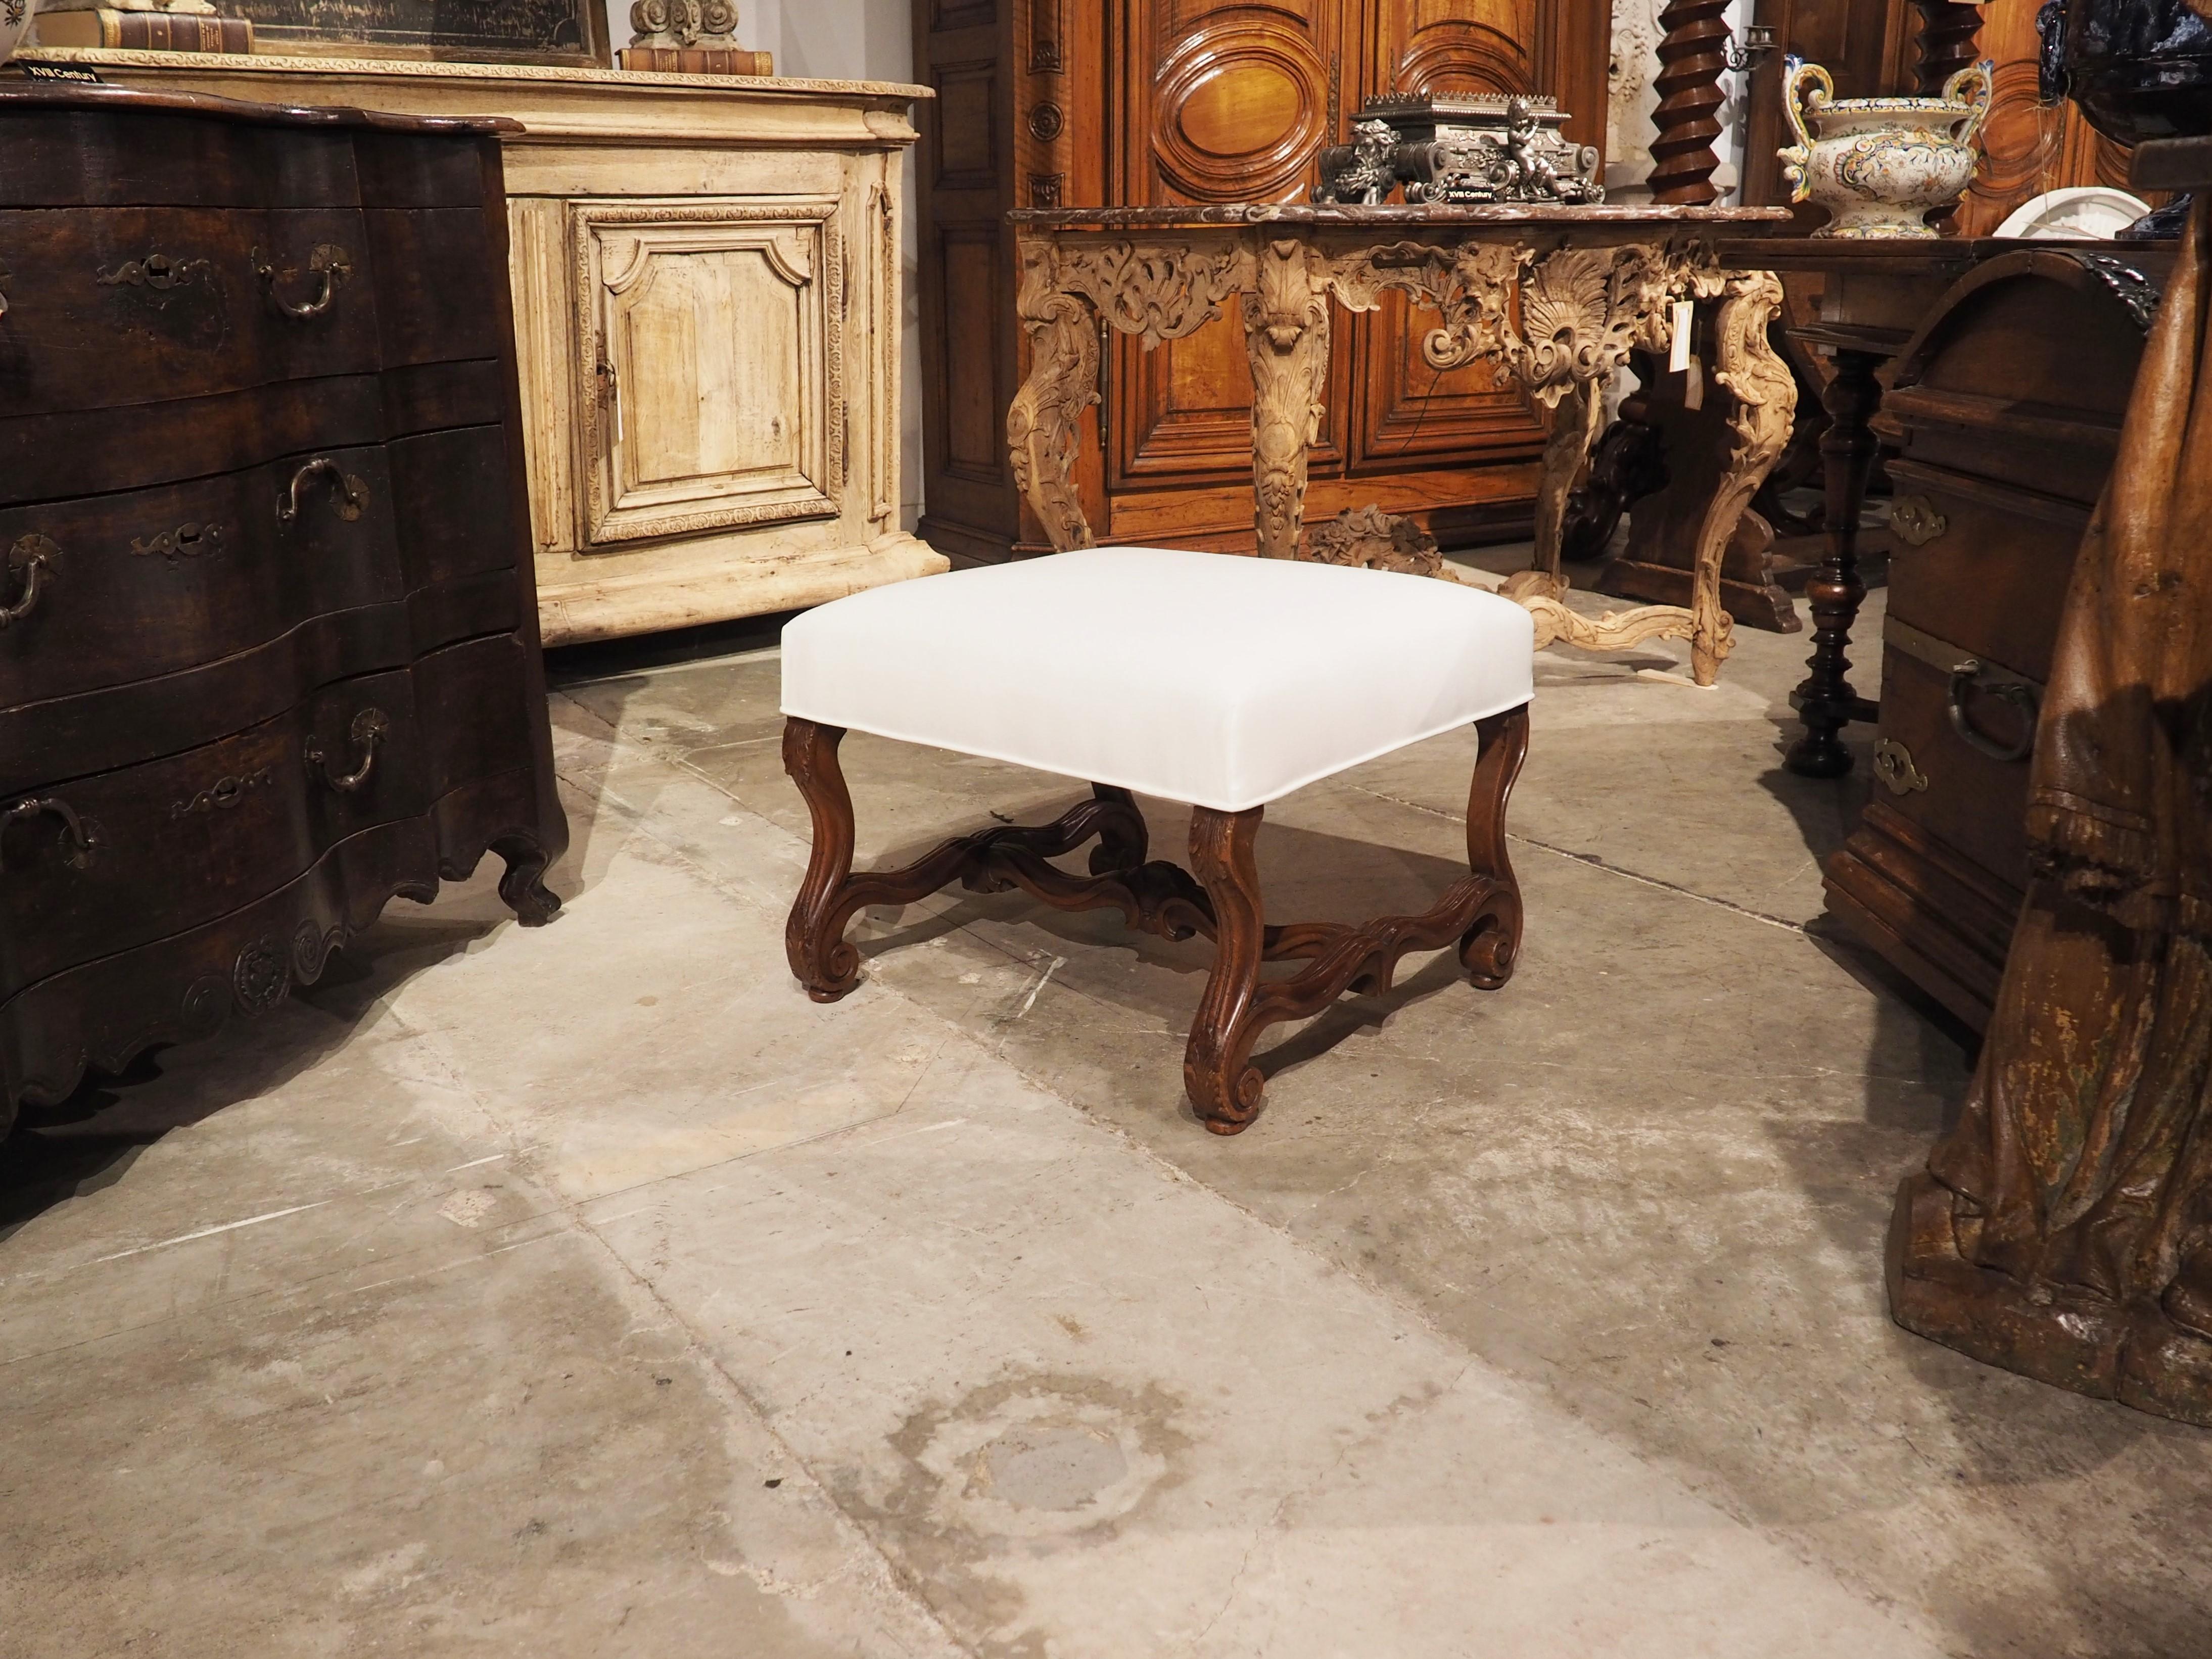 Hand-carved in walnut in France during the early 1900’s, this tabouret stool features os de mouton legs and stretcher. The very distinct shape of os de mouton furniture make it a popular addition for most interior design styles, as the subtle